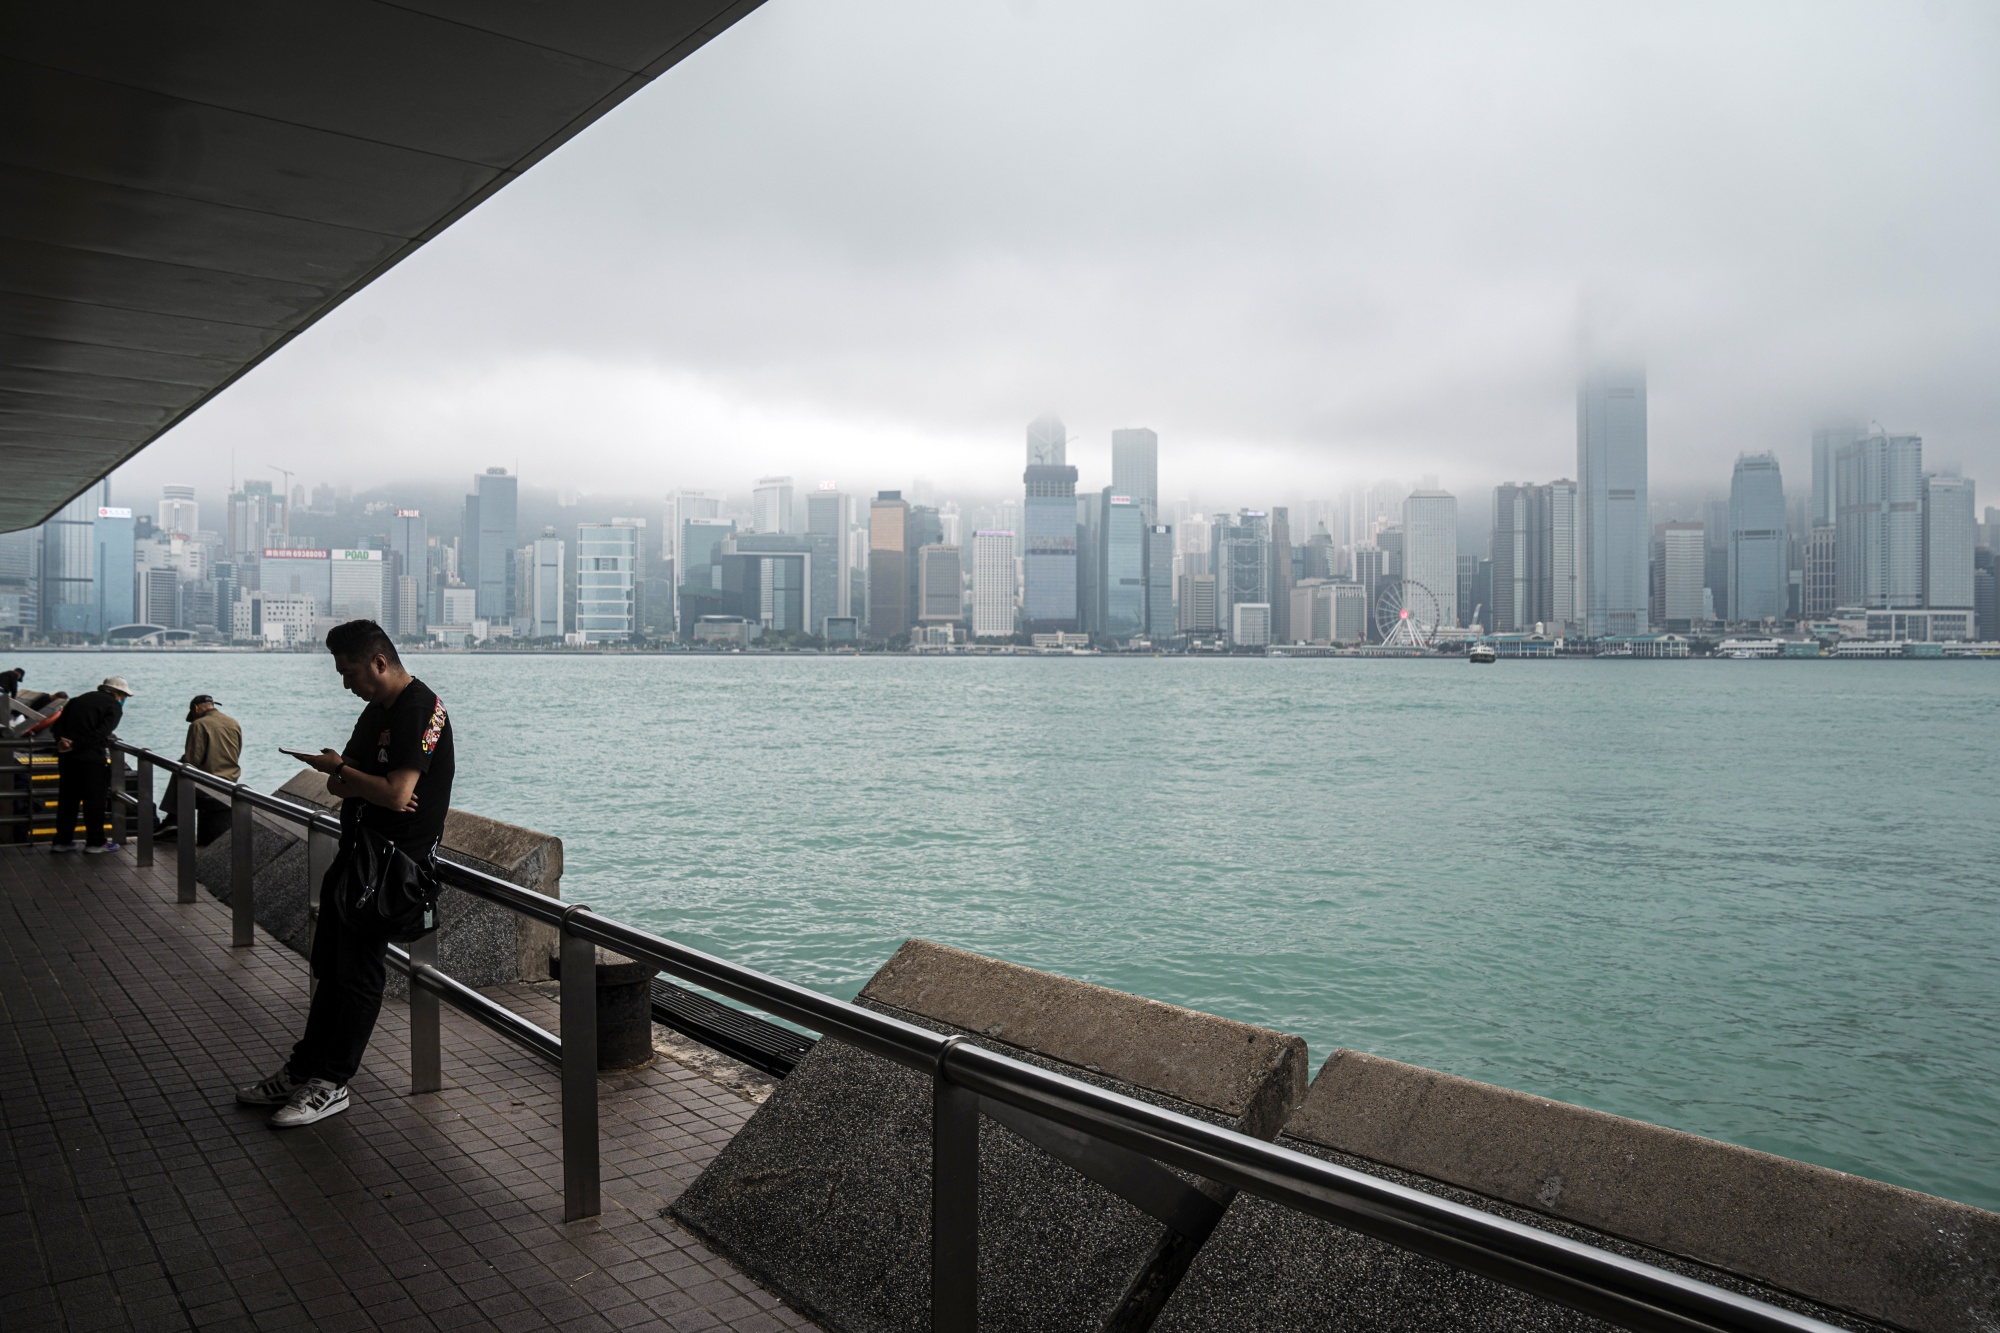 Hong Kong Is Losing Its Fight to Repair Image as Shopping Heaven - Bloomberg